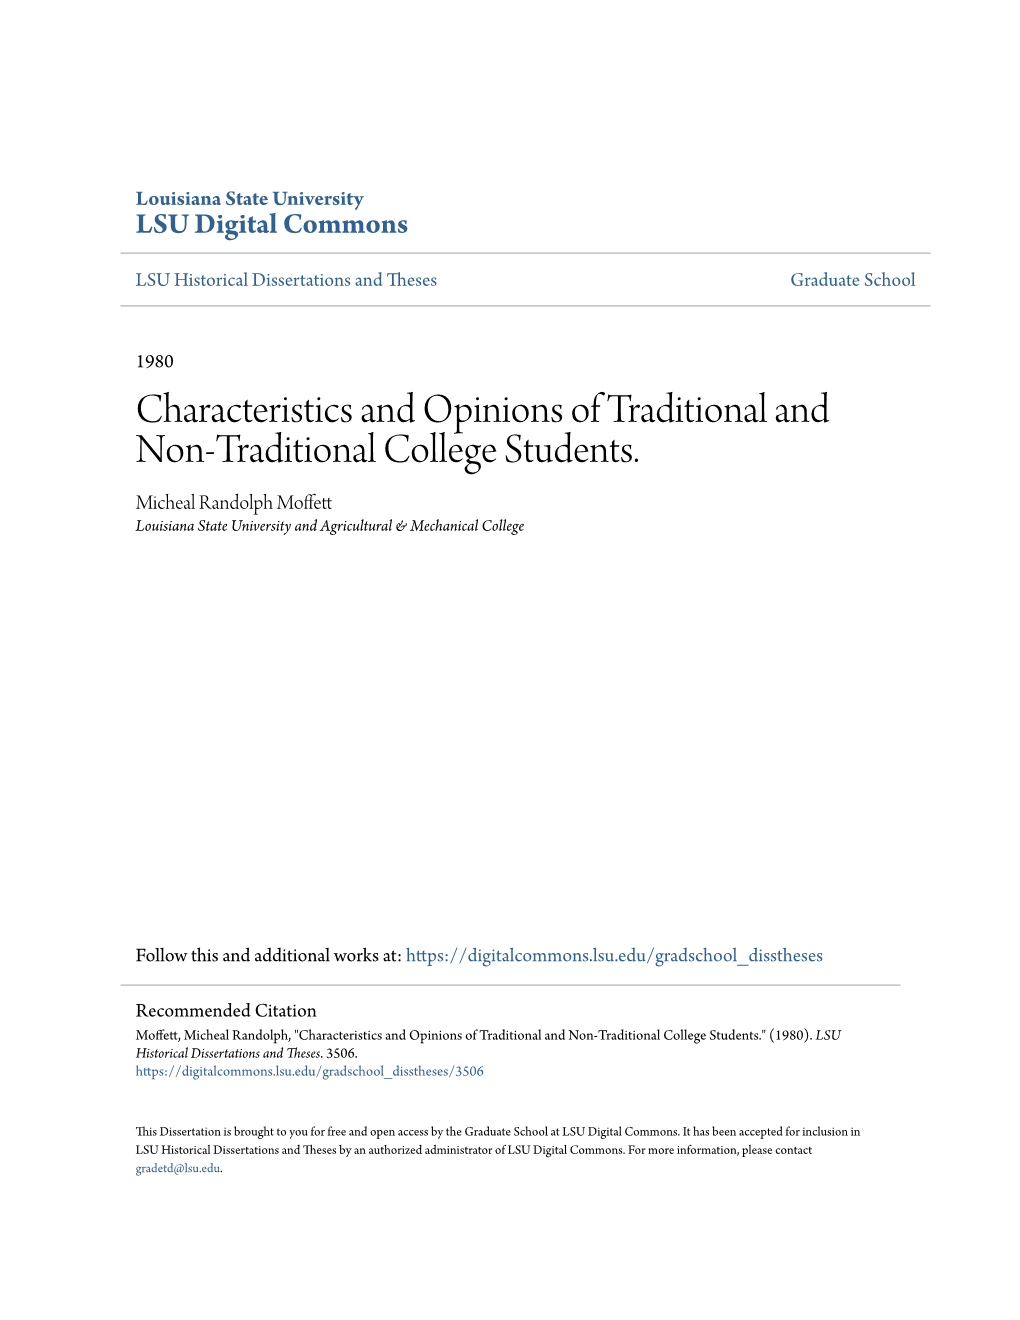 Characteristics and Opinions of Traditional and Non-Traditional College Students